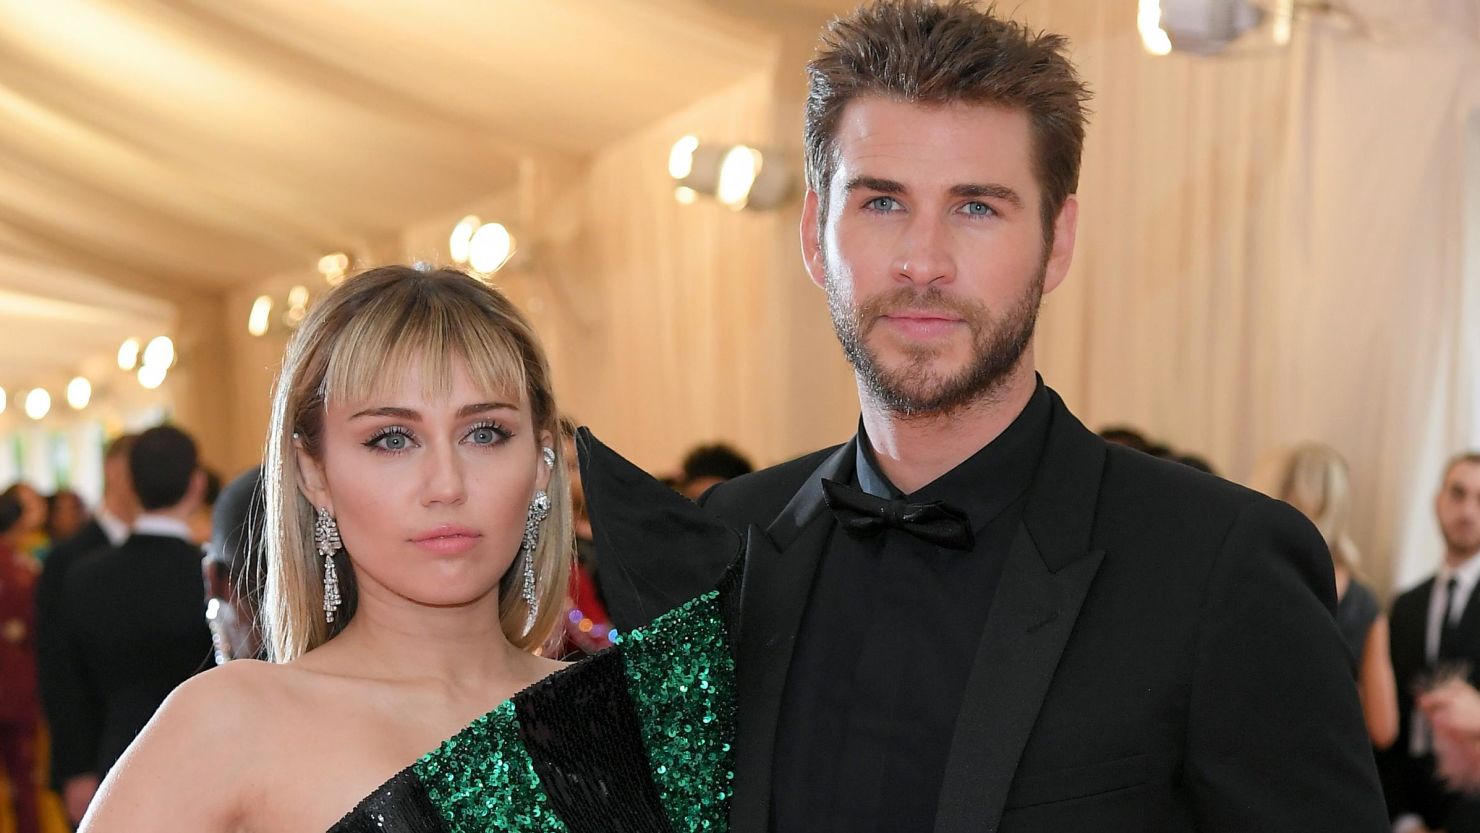 Miley Cyrus and Liam Hemsworth in 2019. (Photo by Neilson Barnard/Getty Images)